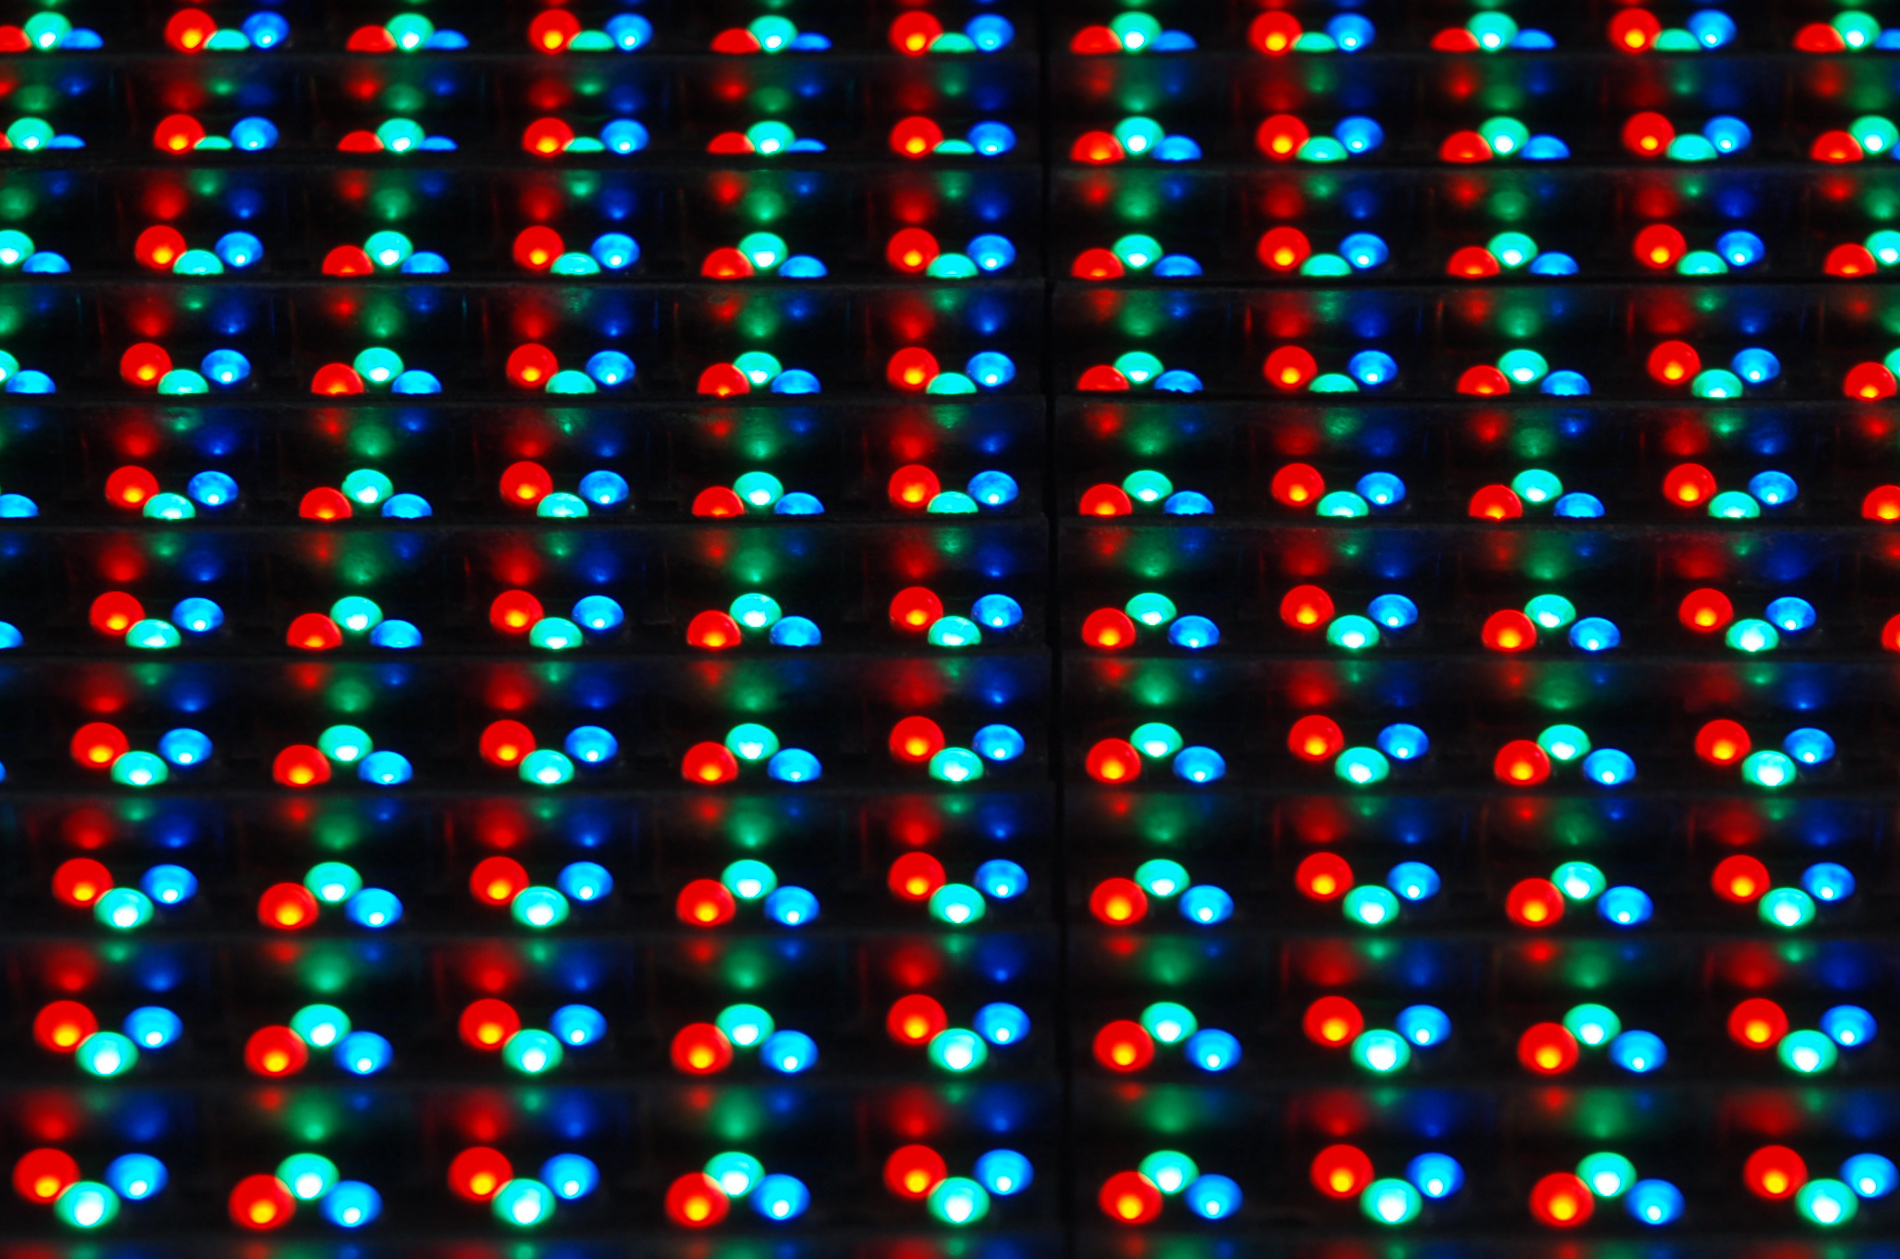 Different kinds of LED display screens